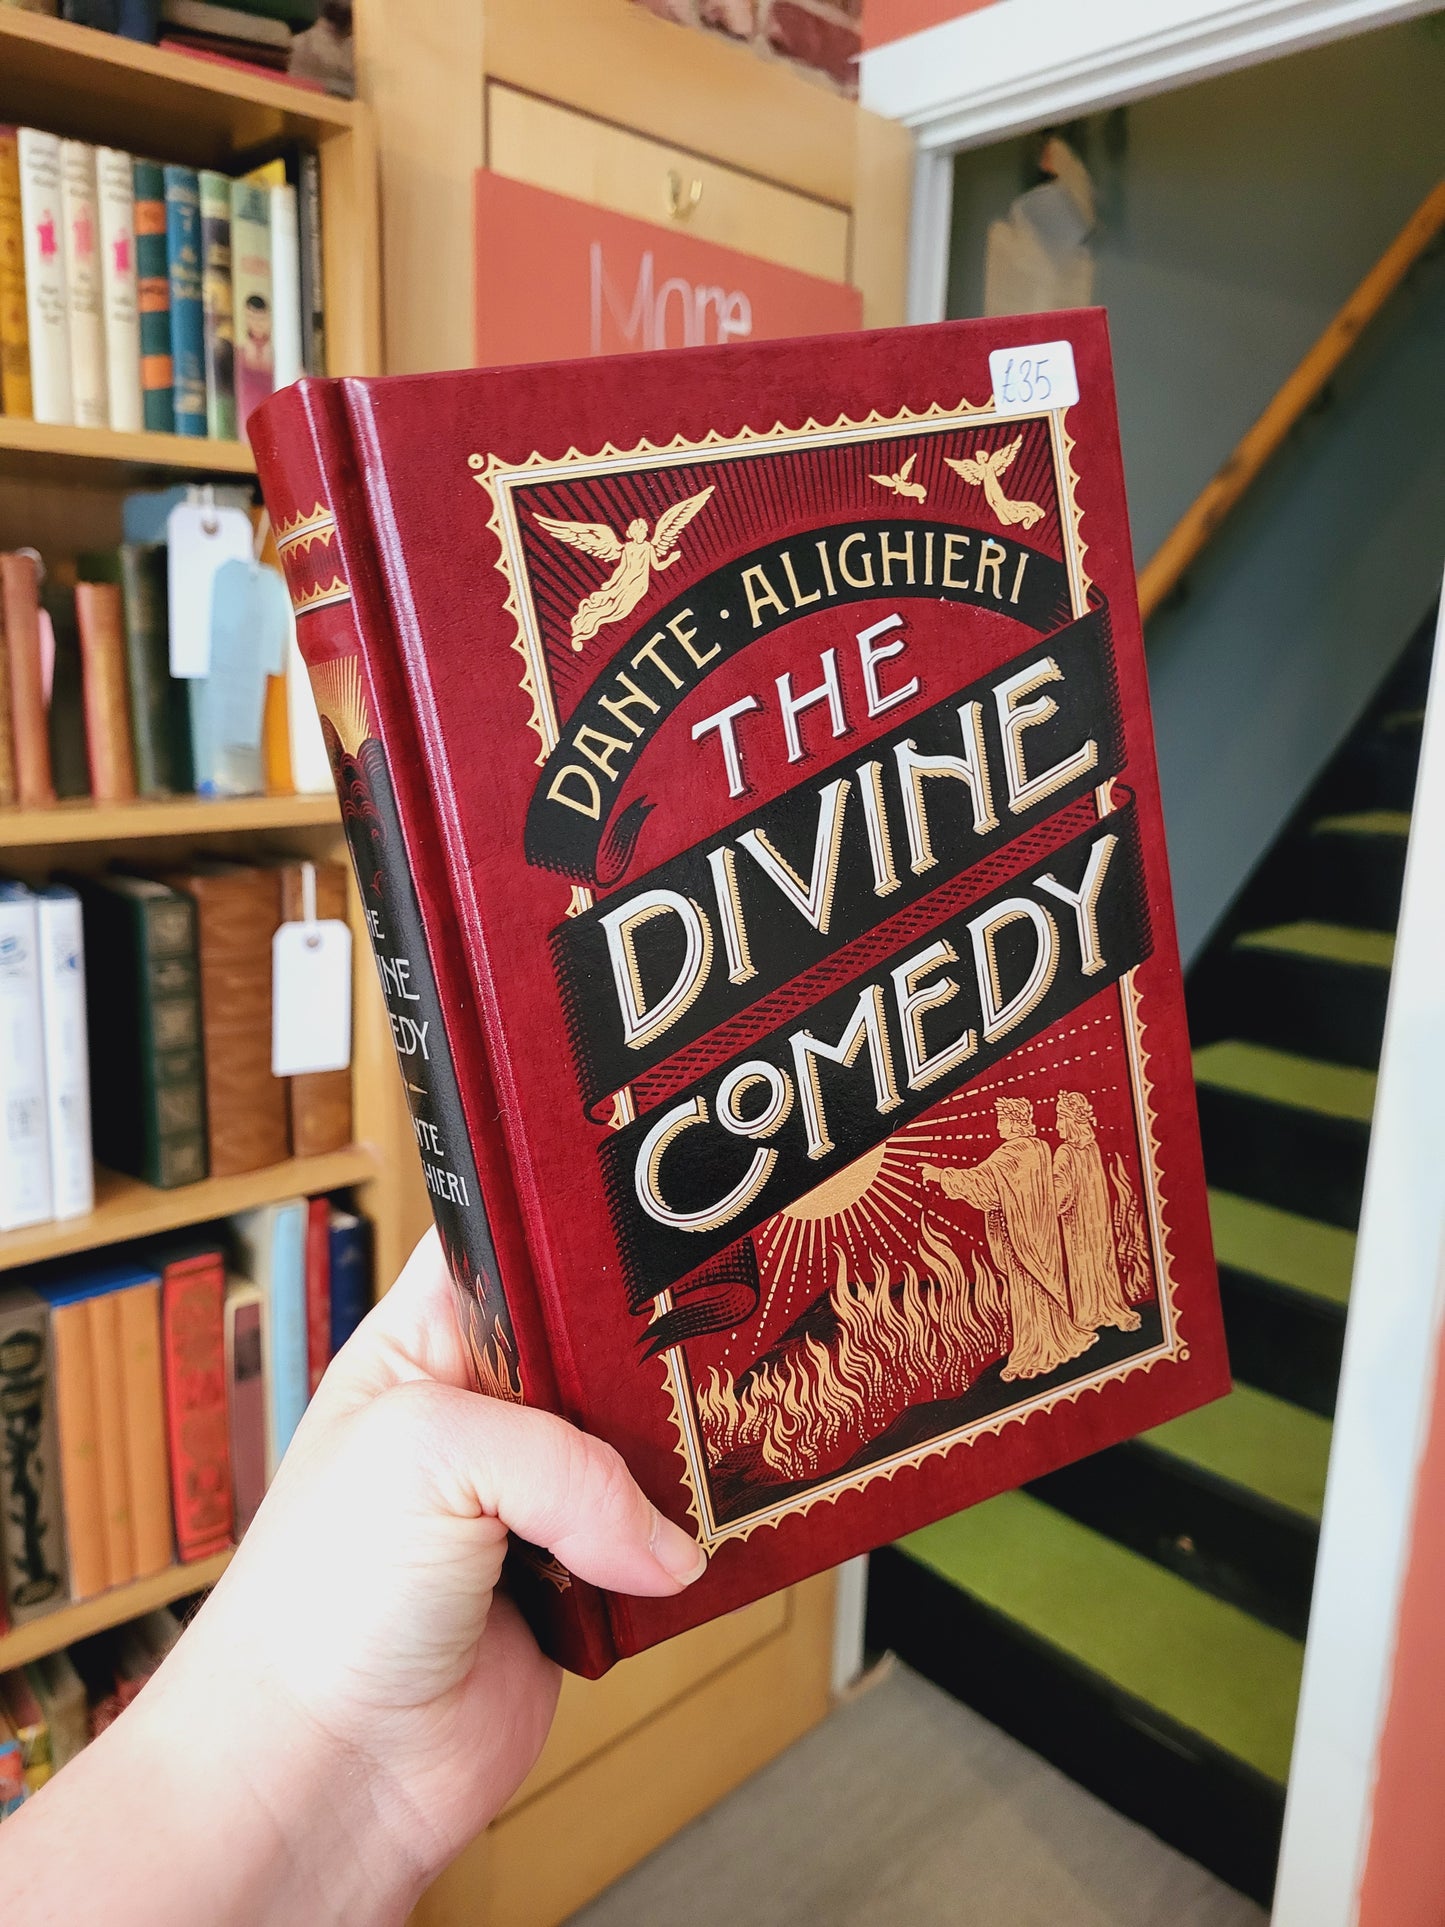 The Divine Comedy - Dante Alighieri (Barnes & Noble Leatherbound, Illustrated by Gustave Dore)